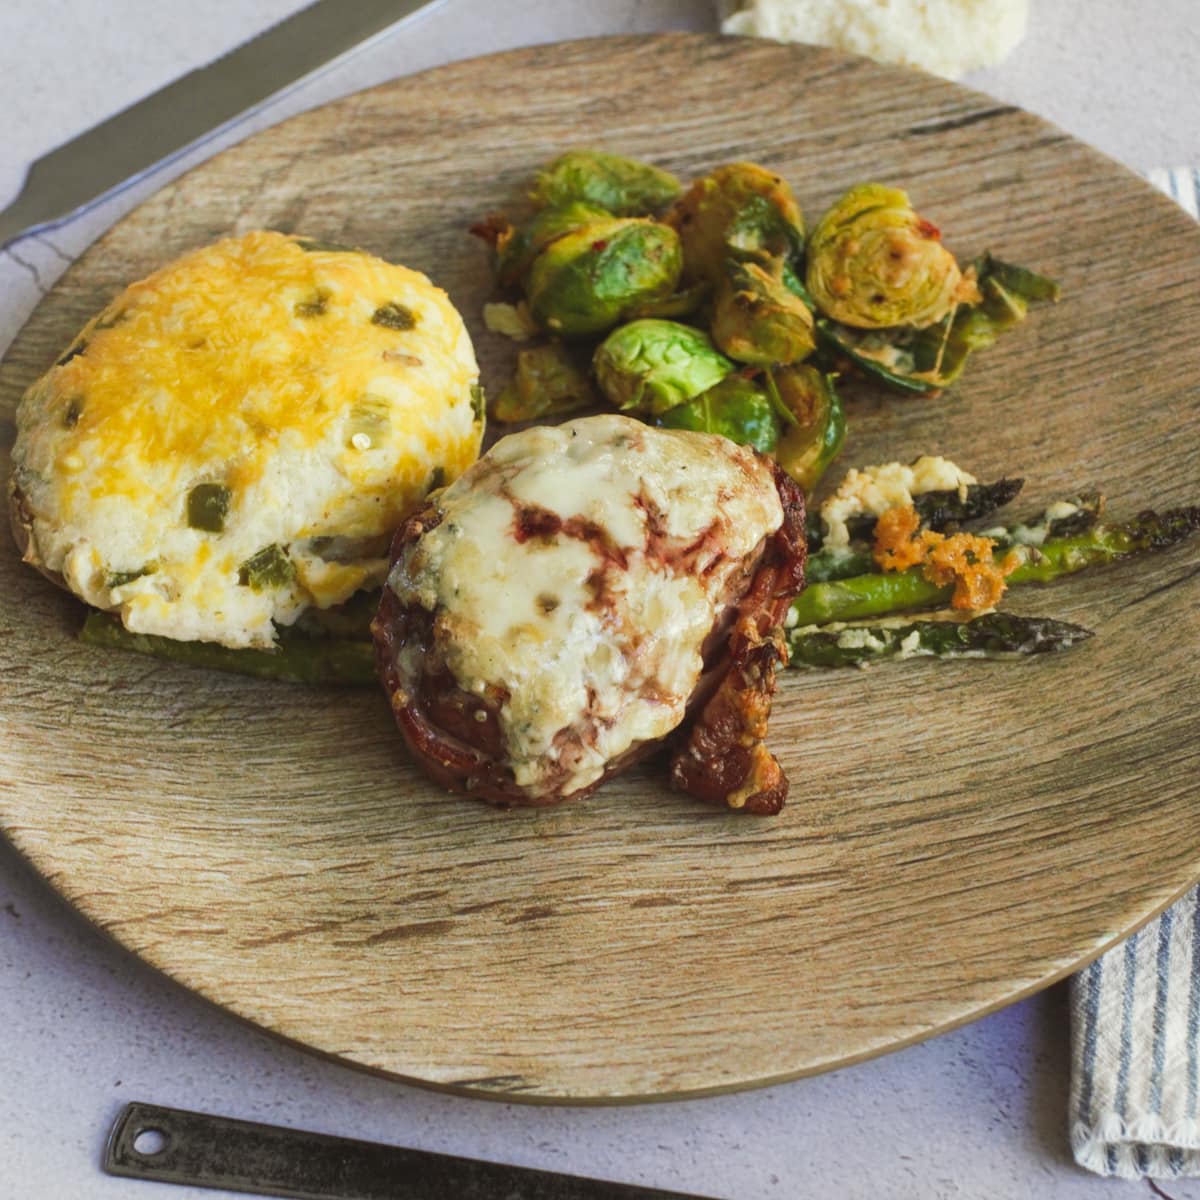 4 cheese crusted bacon wrapped filet with twice baked potato and Brussel sprouts.